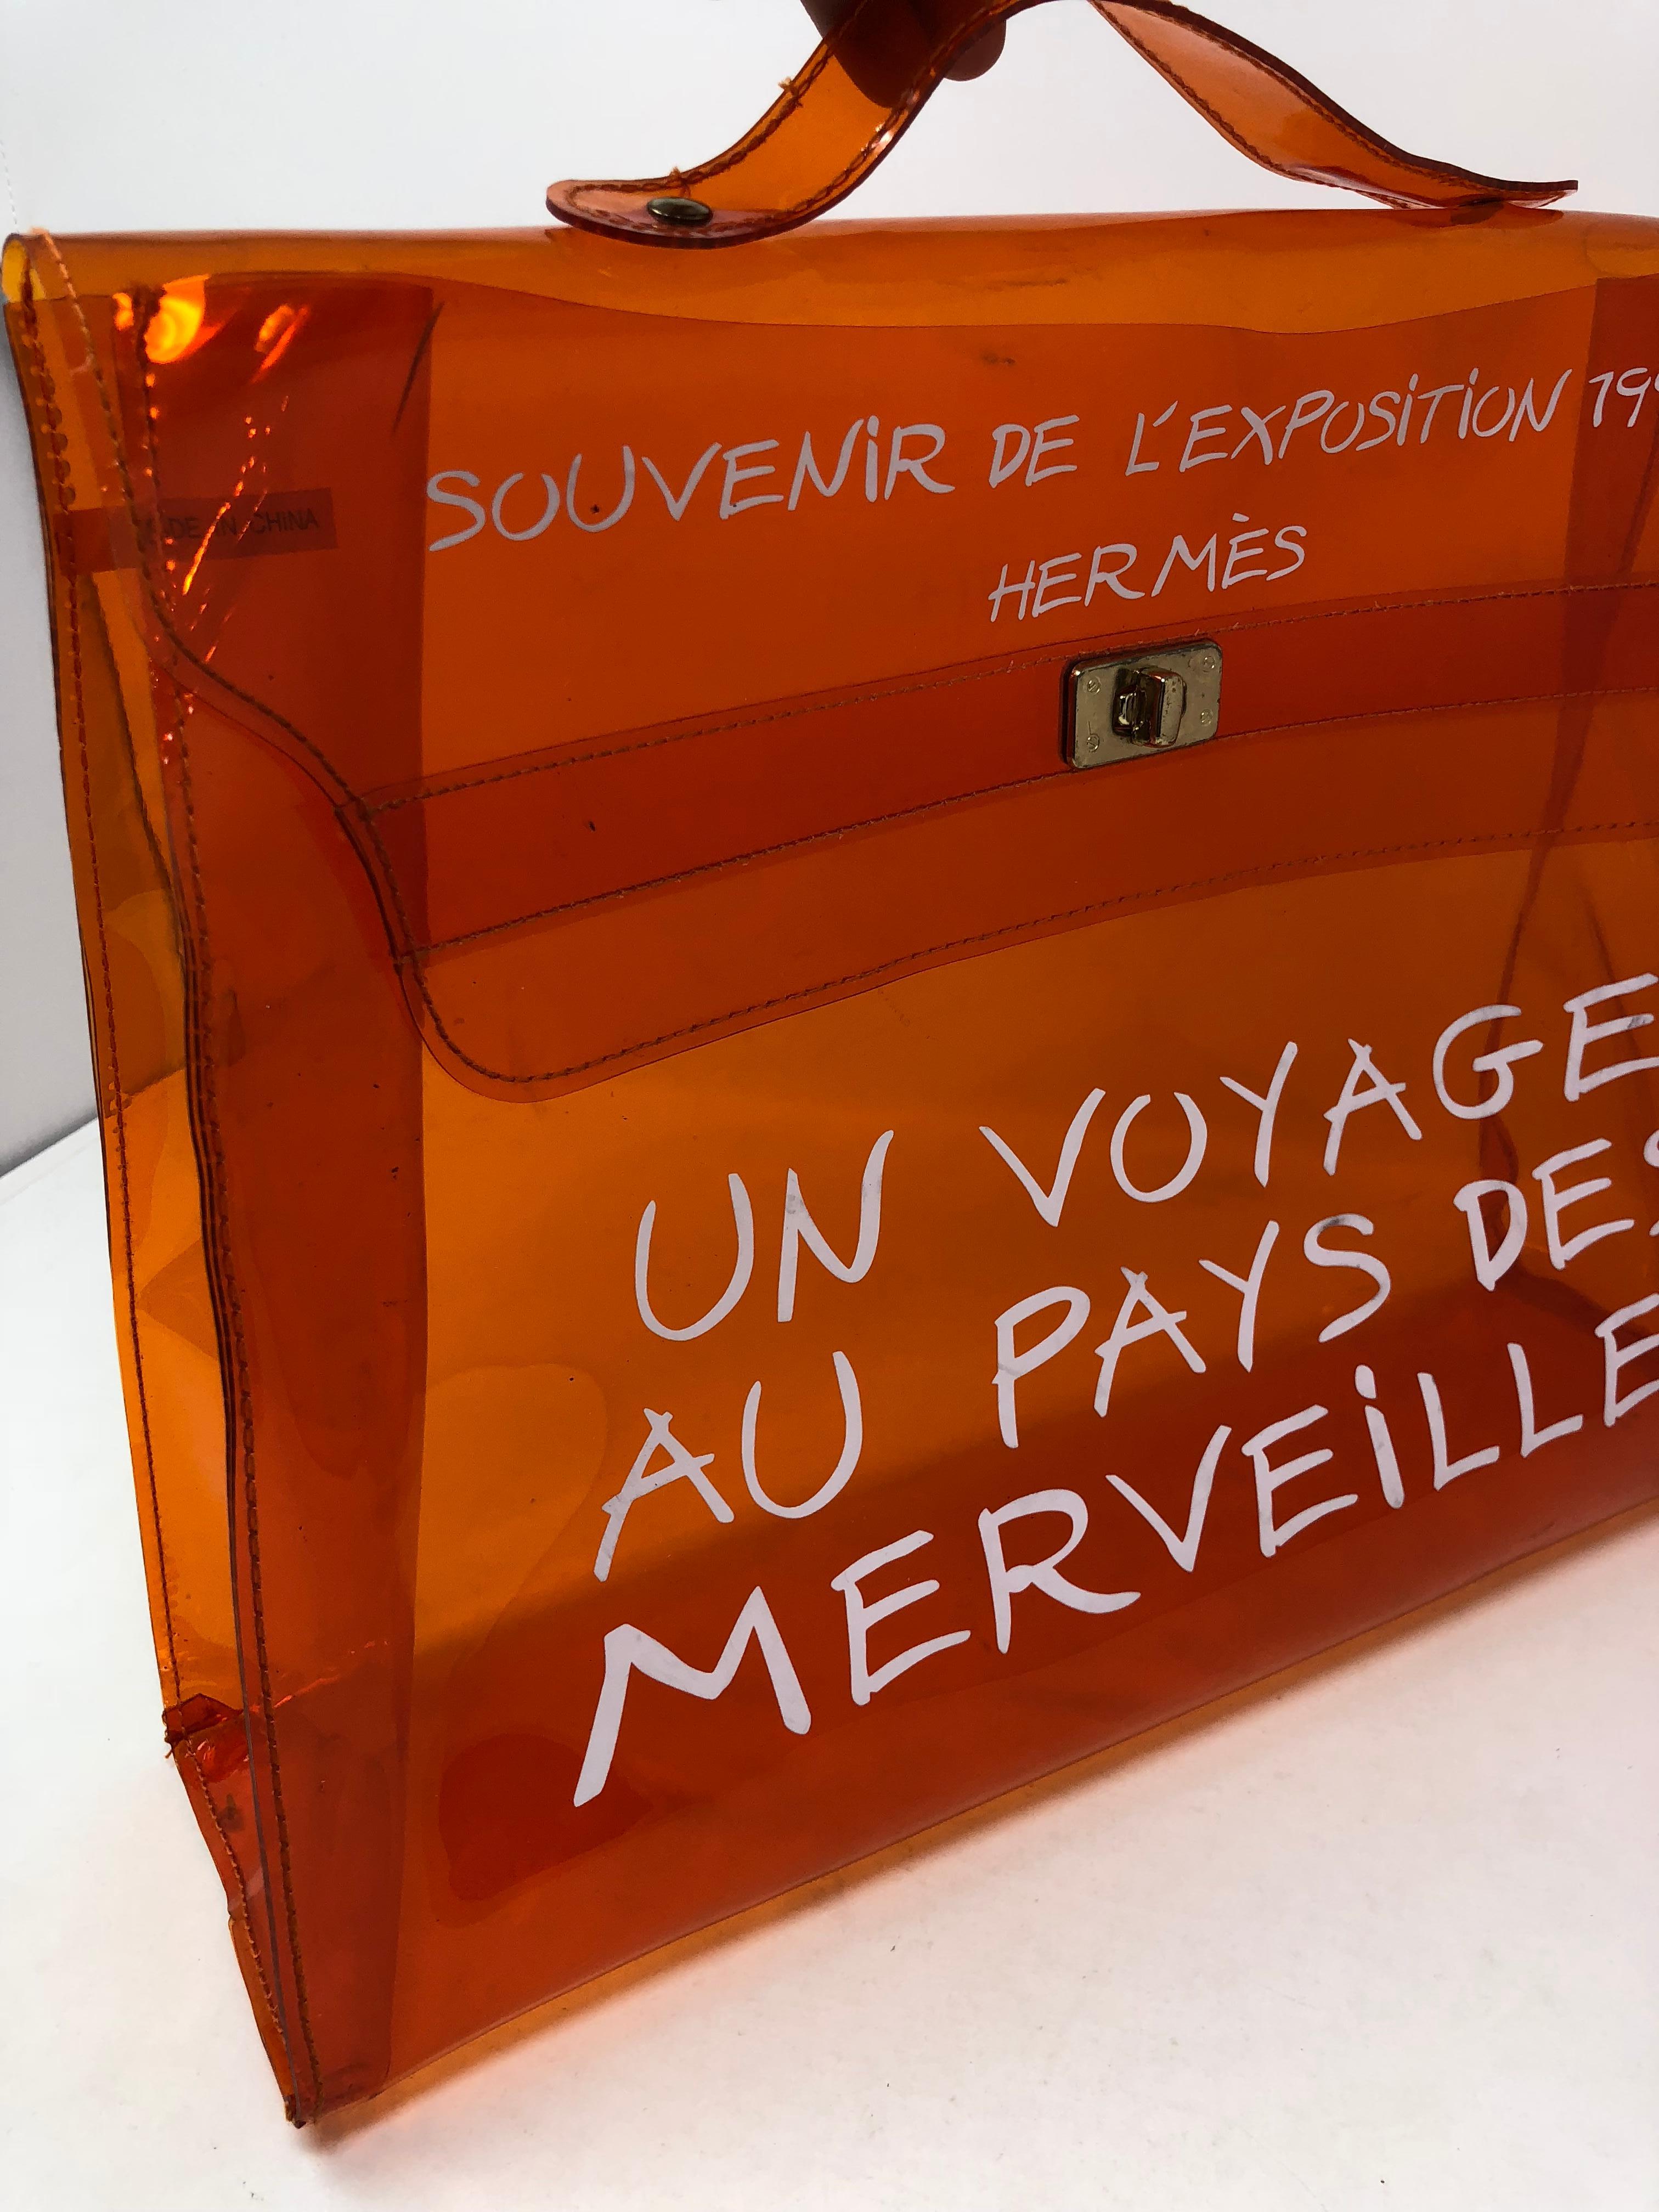 Hermes Vintage 1998 Kelly Souvenir De L'Exposition Vinyl Translucent Bag. This clear bag in orange vinyl is stadium approved and super cute. Collector's piece and in good preowned condition. Guaranteed authentic. 